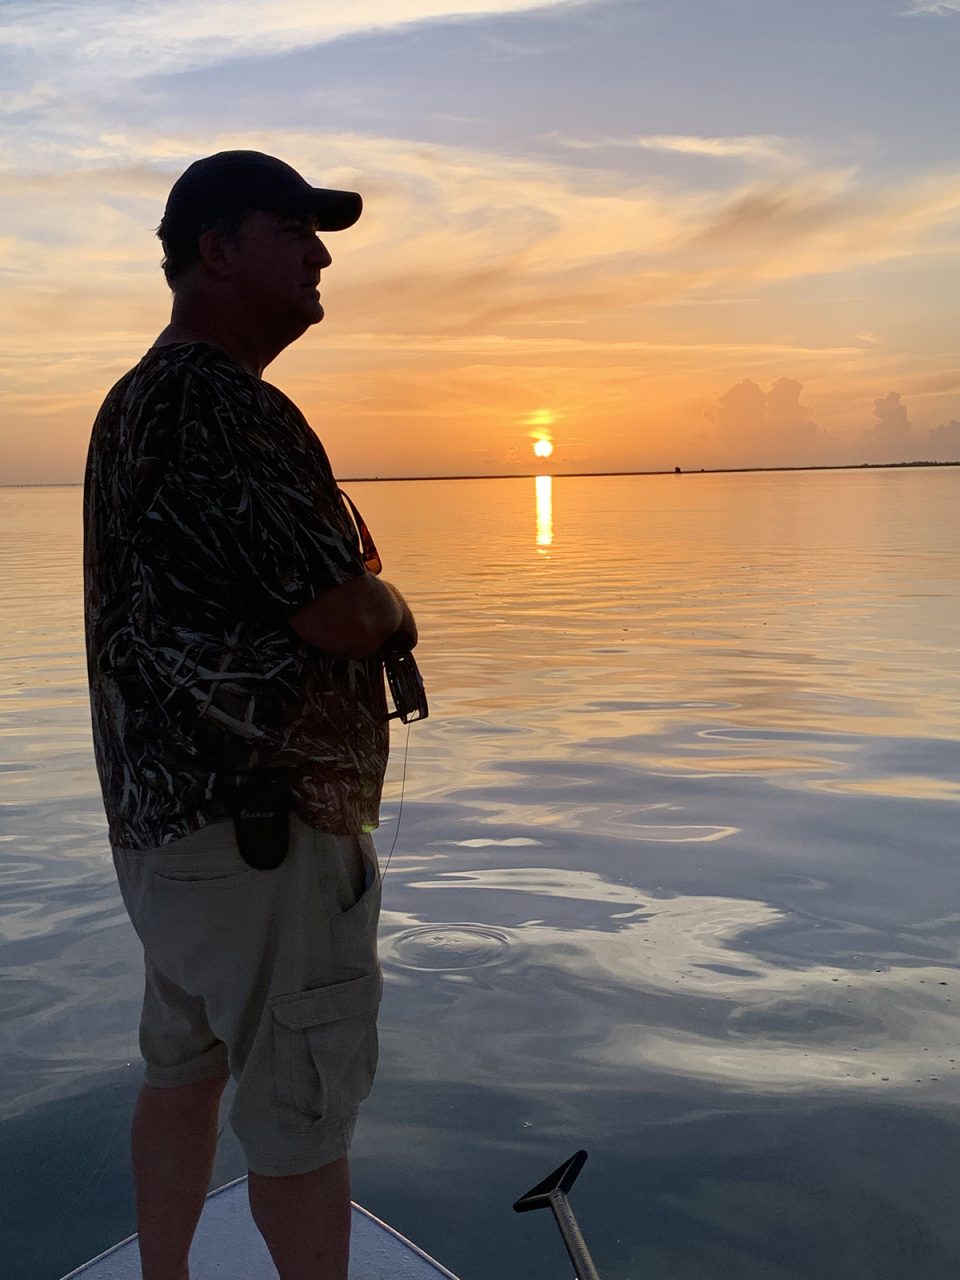 Capt. Gordon gets out on the water early. Photo: Gordon Churchill